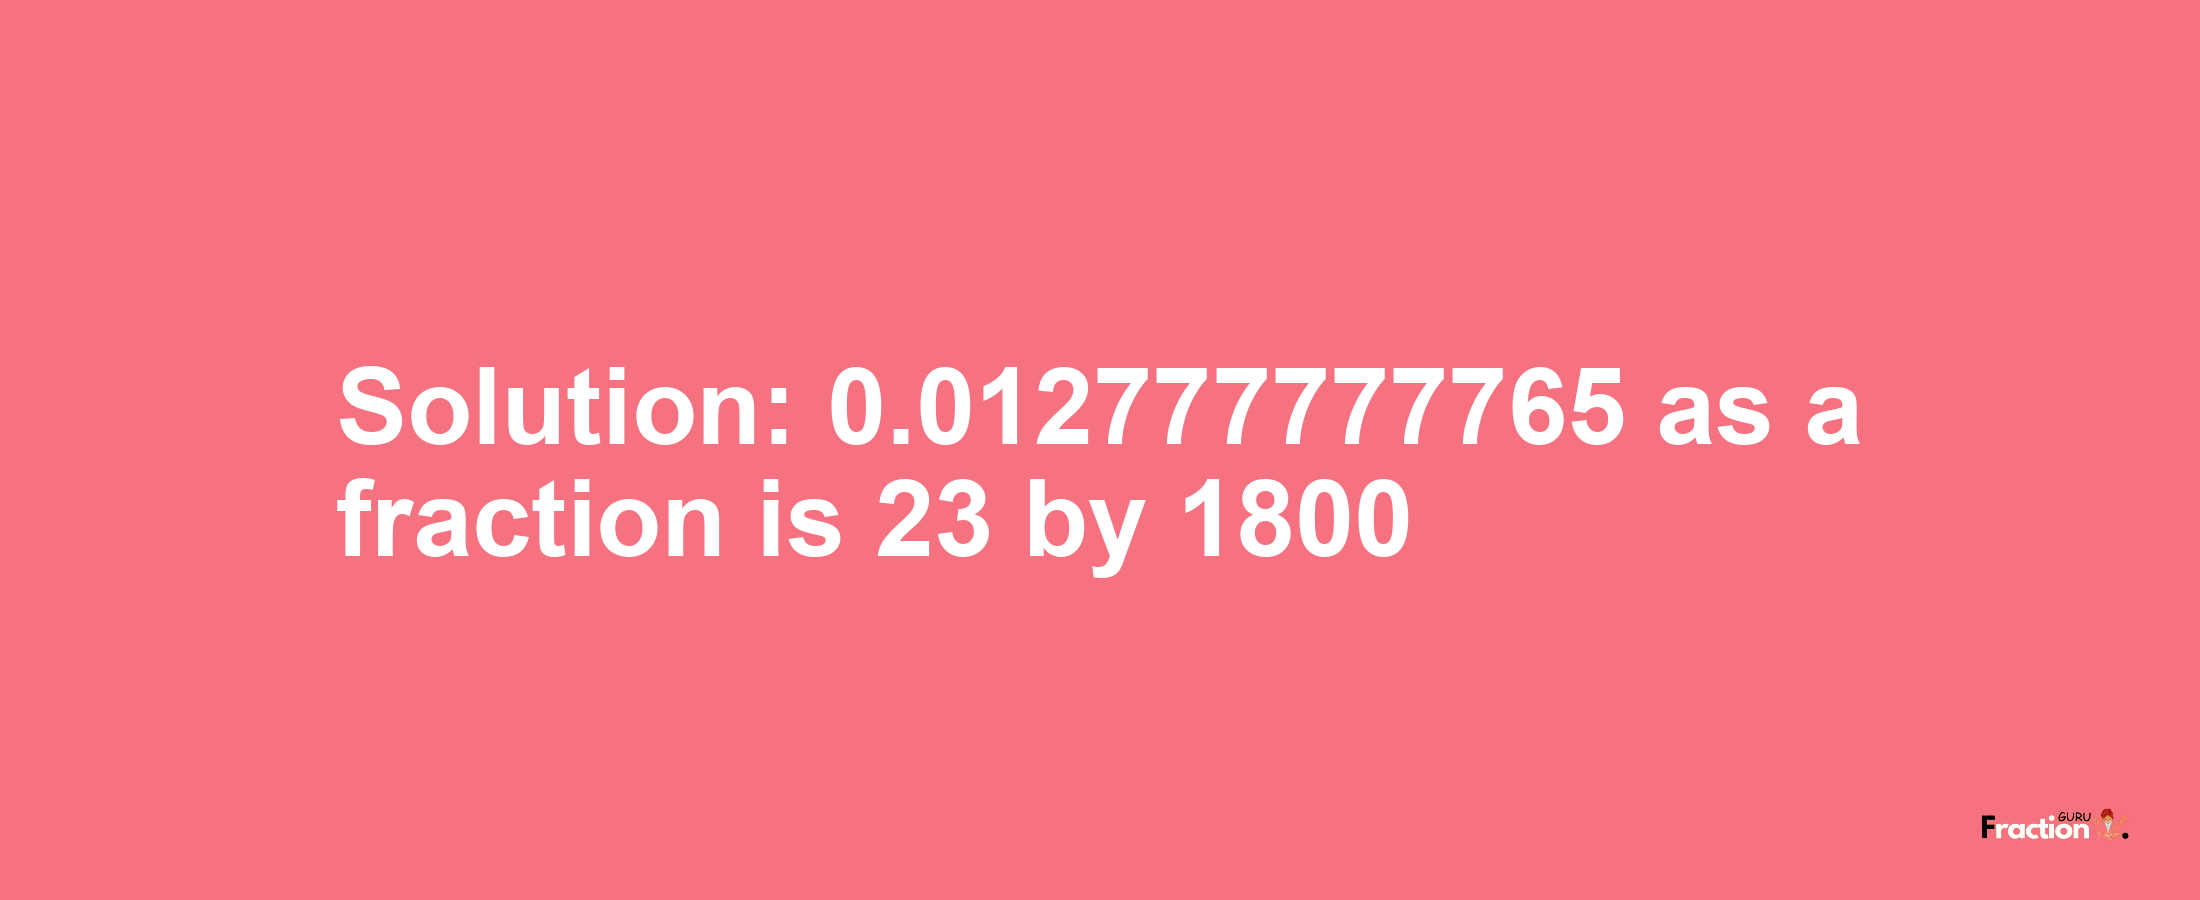 Solution:0.012777777765 as a fraction is 23/1800